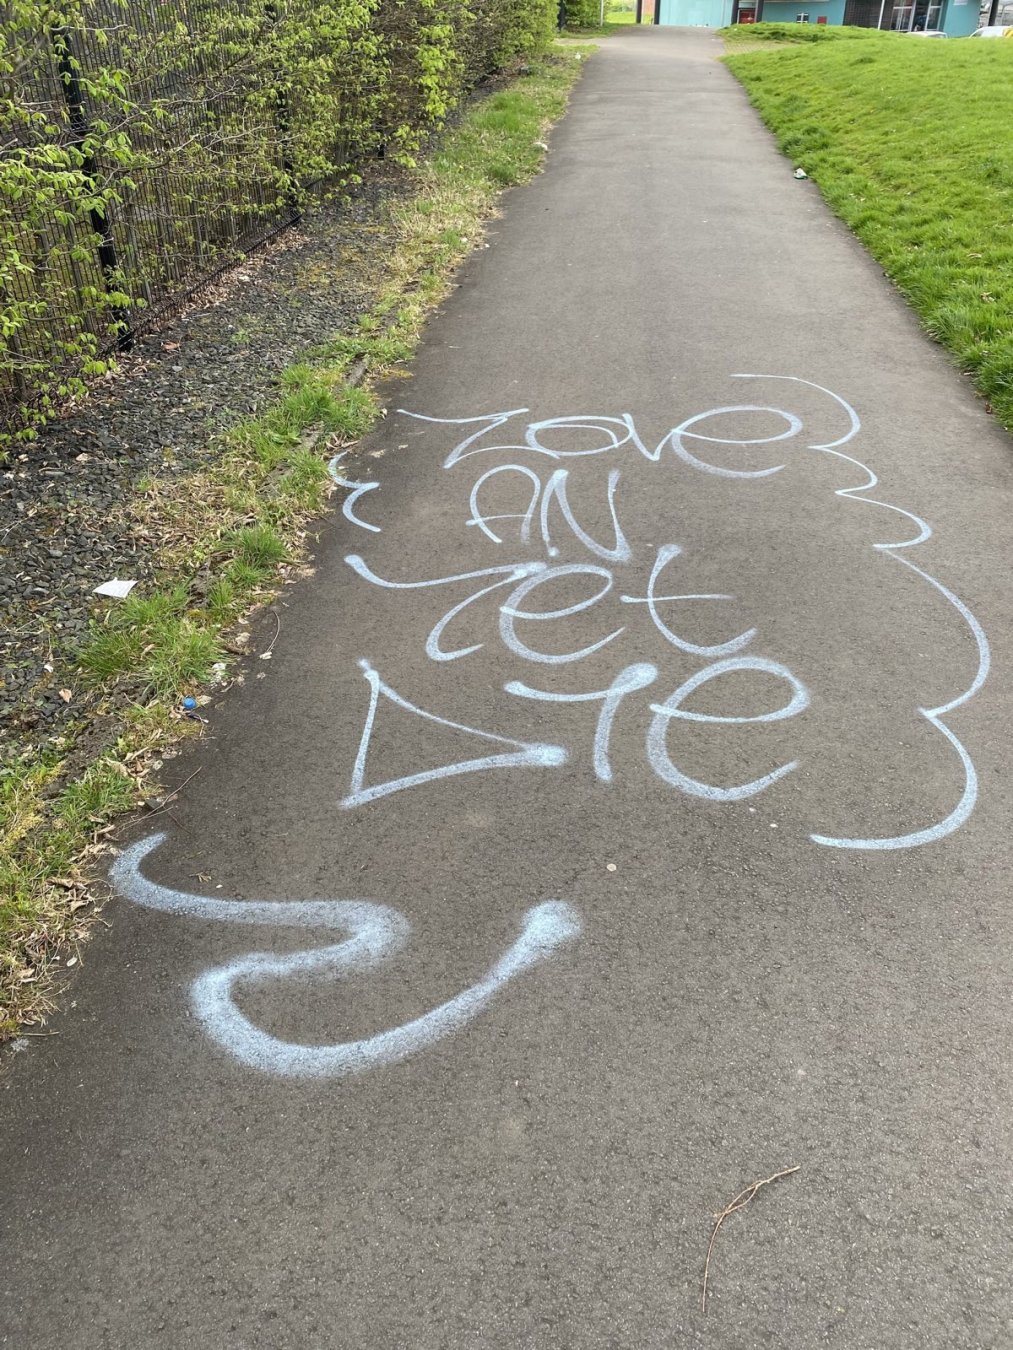 graffiti, the words LOVE AND LET DIE painted on a walking path